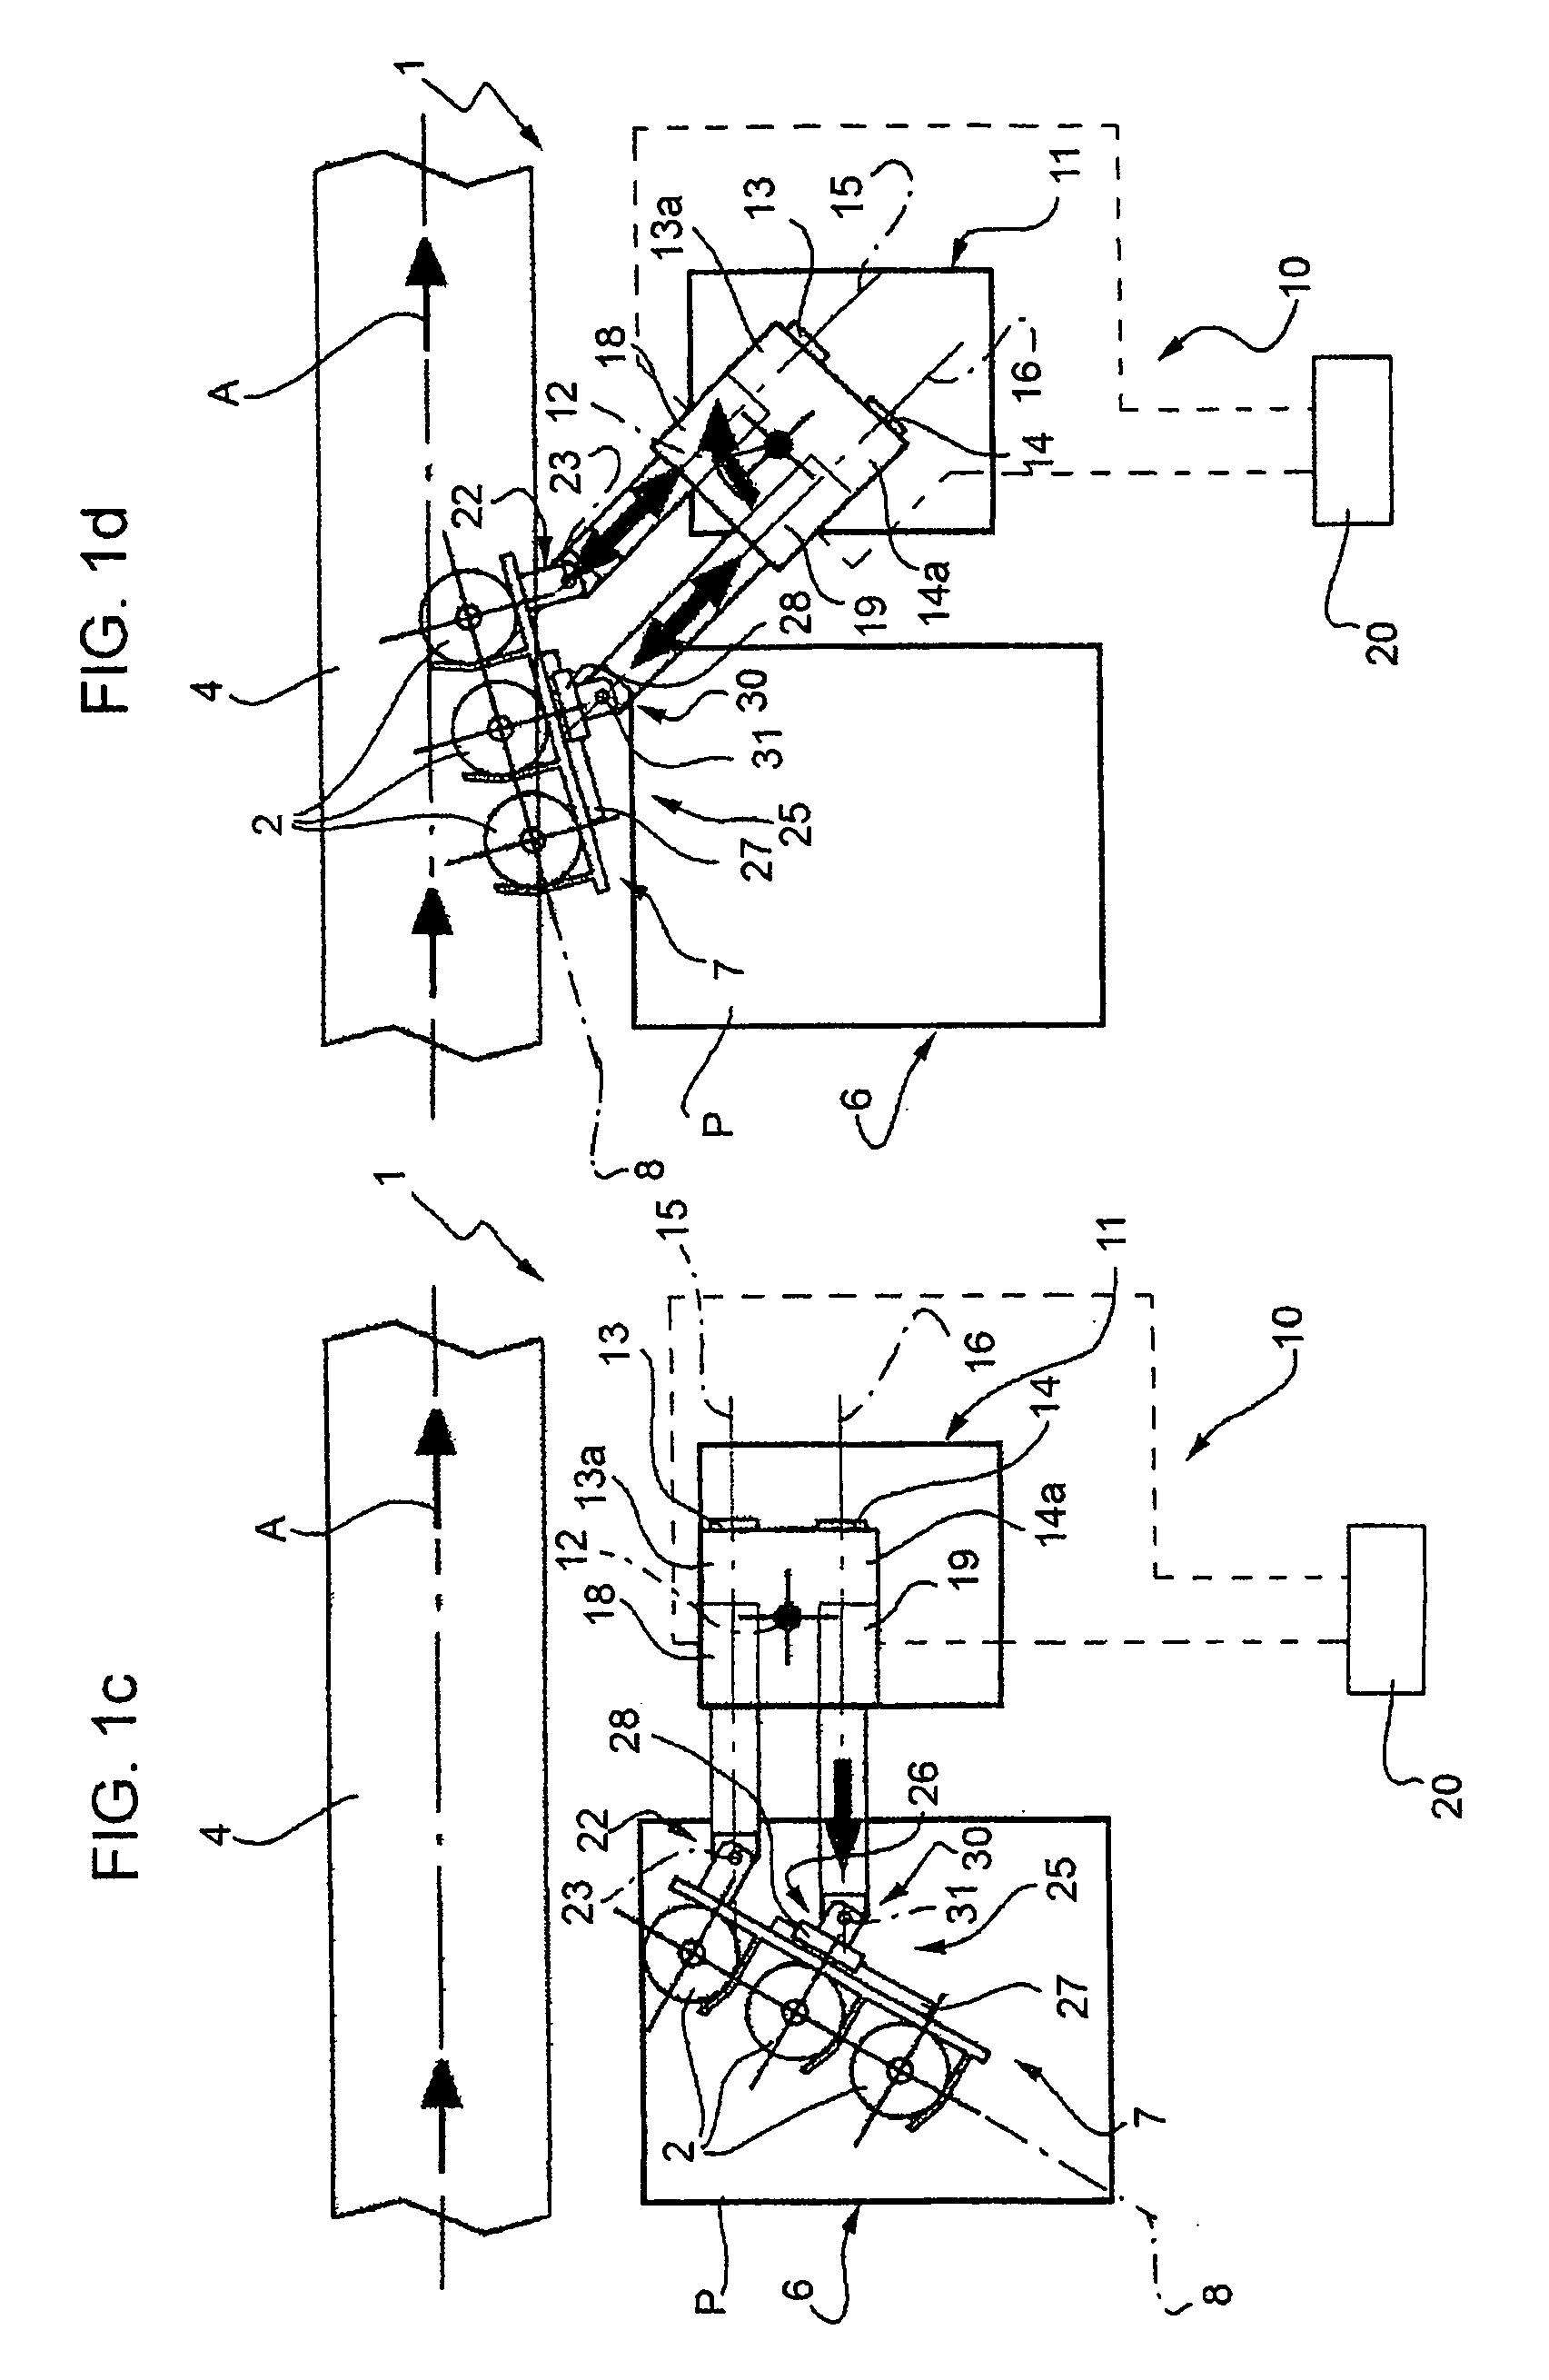 Transfer assembly for transferring glass articles